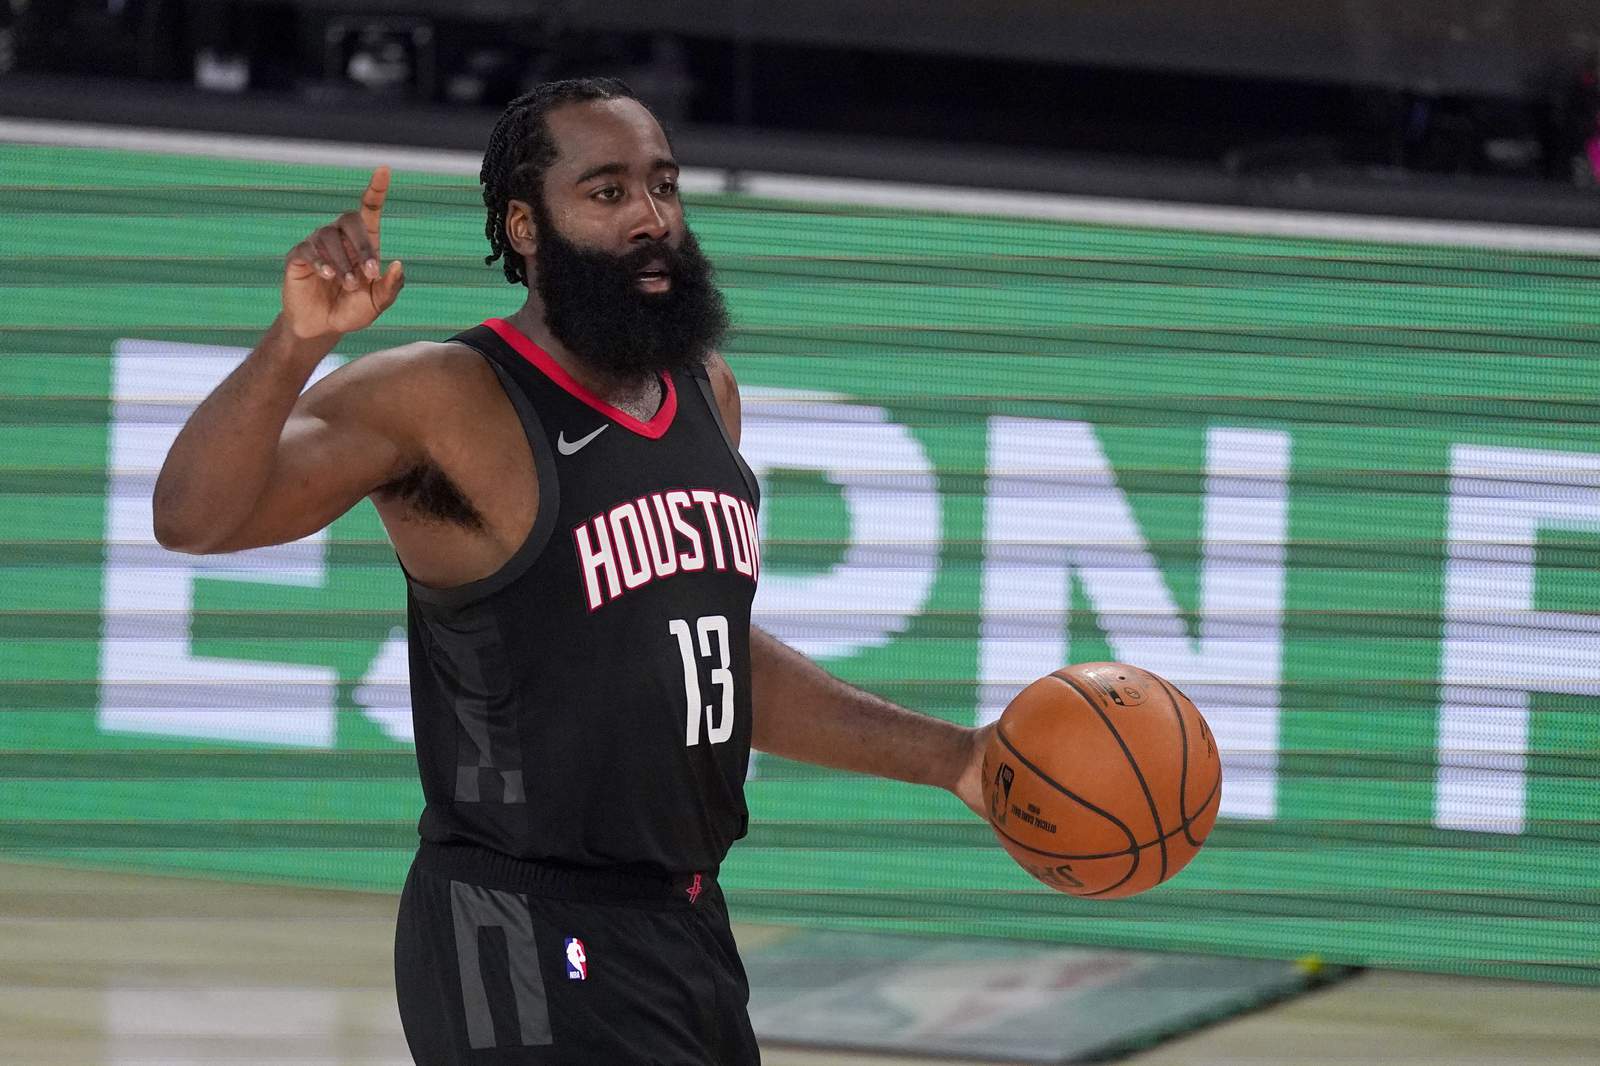 Rockets finalizing trade of Covington to Blazers, Harden asking for trade to Nets